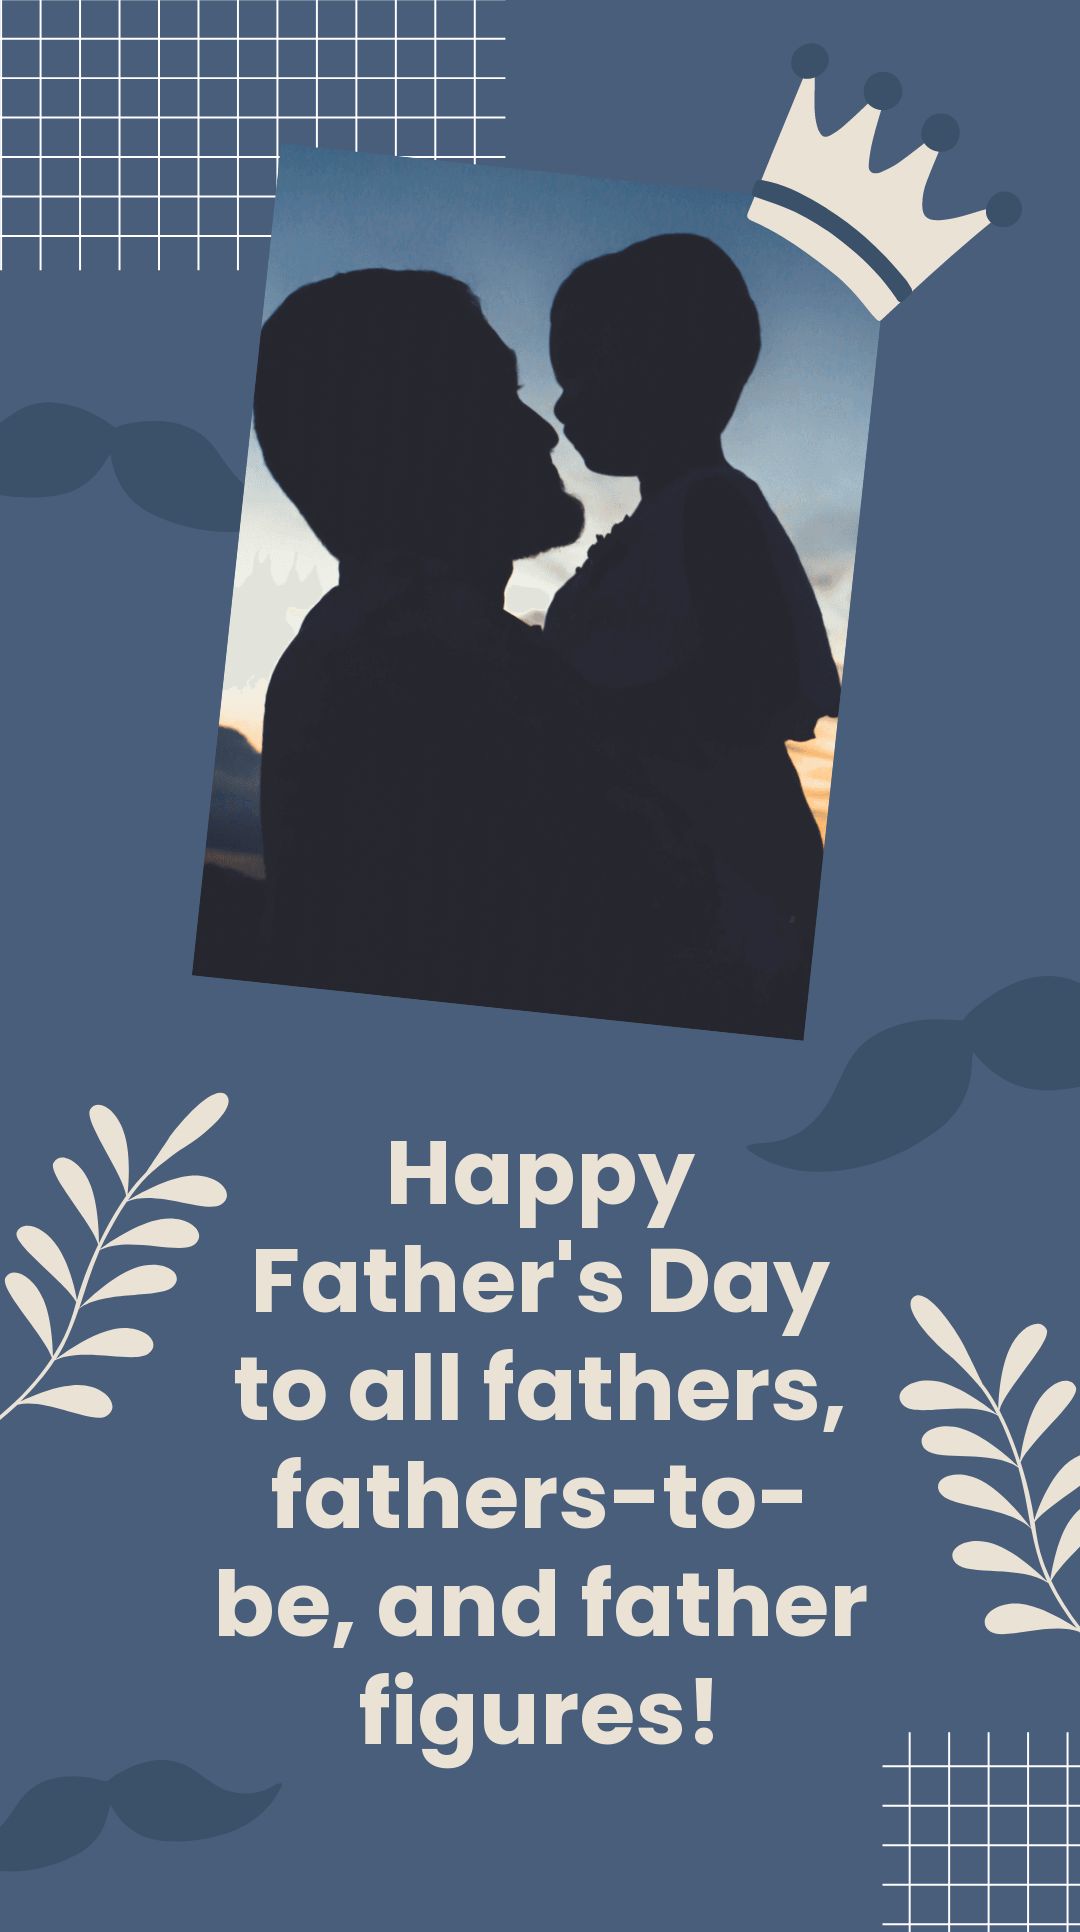 Father's Day Greetings Whatsapp Status Template